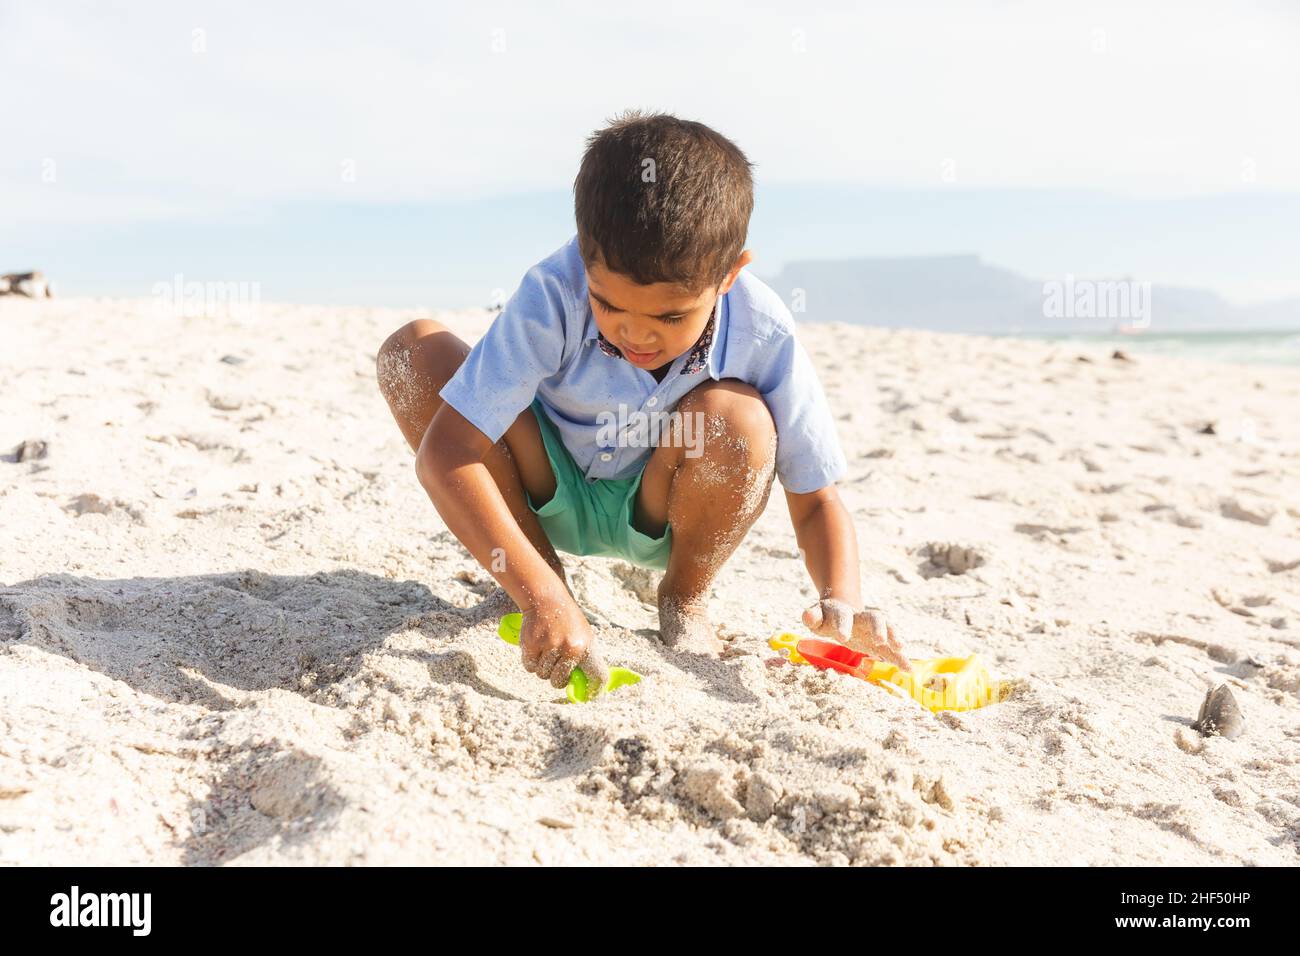 Full length of biracial boy crouching while playing with sand and toys at beach on sunny day Stock Photo